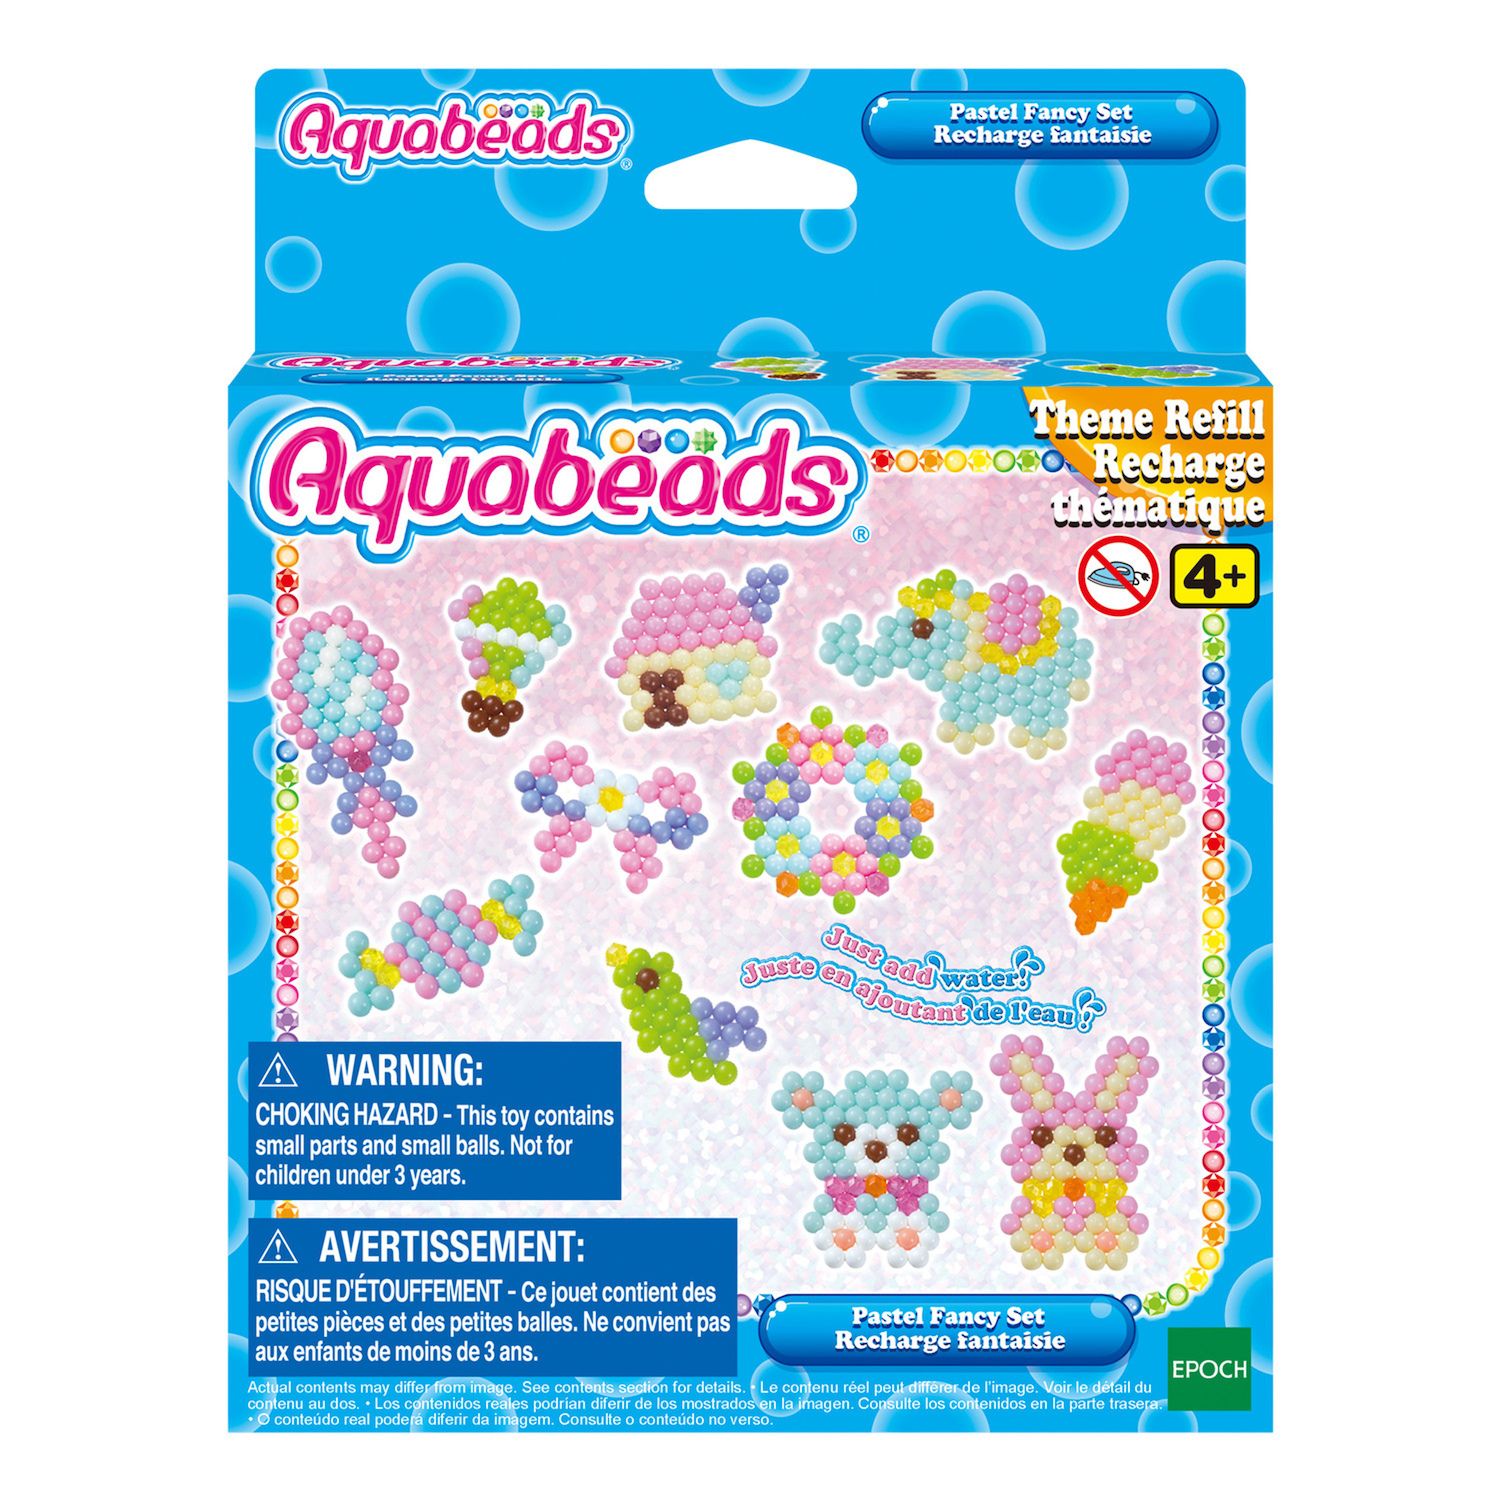 Aquabeads Pastel Solid Bead Pack, Arts & Crafts Bead Refill Kit for  Children - over 800 solid beads in 6 pastel colors